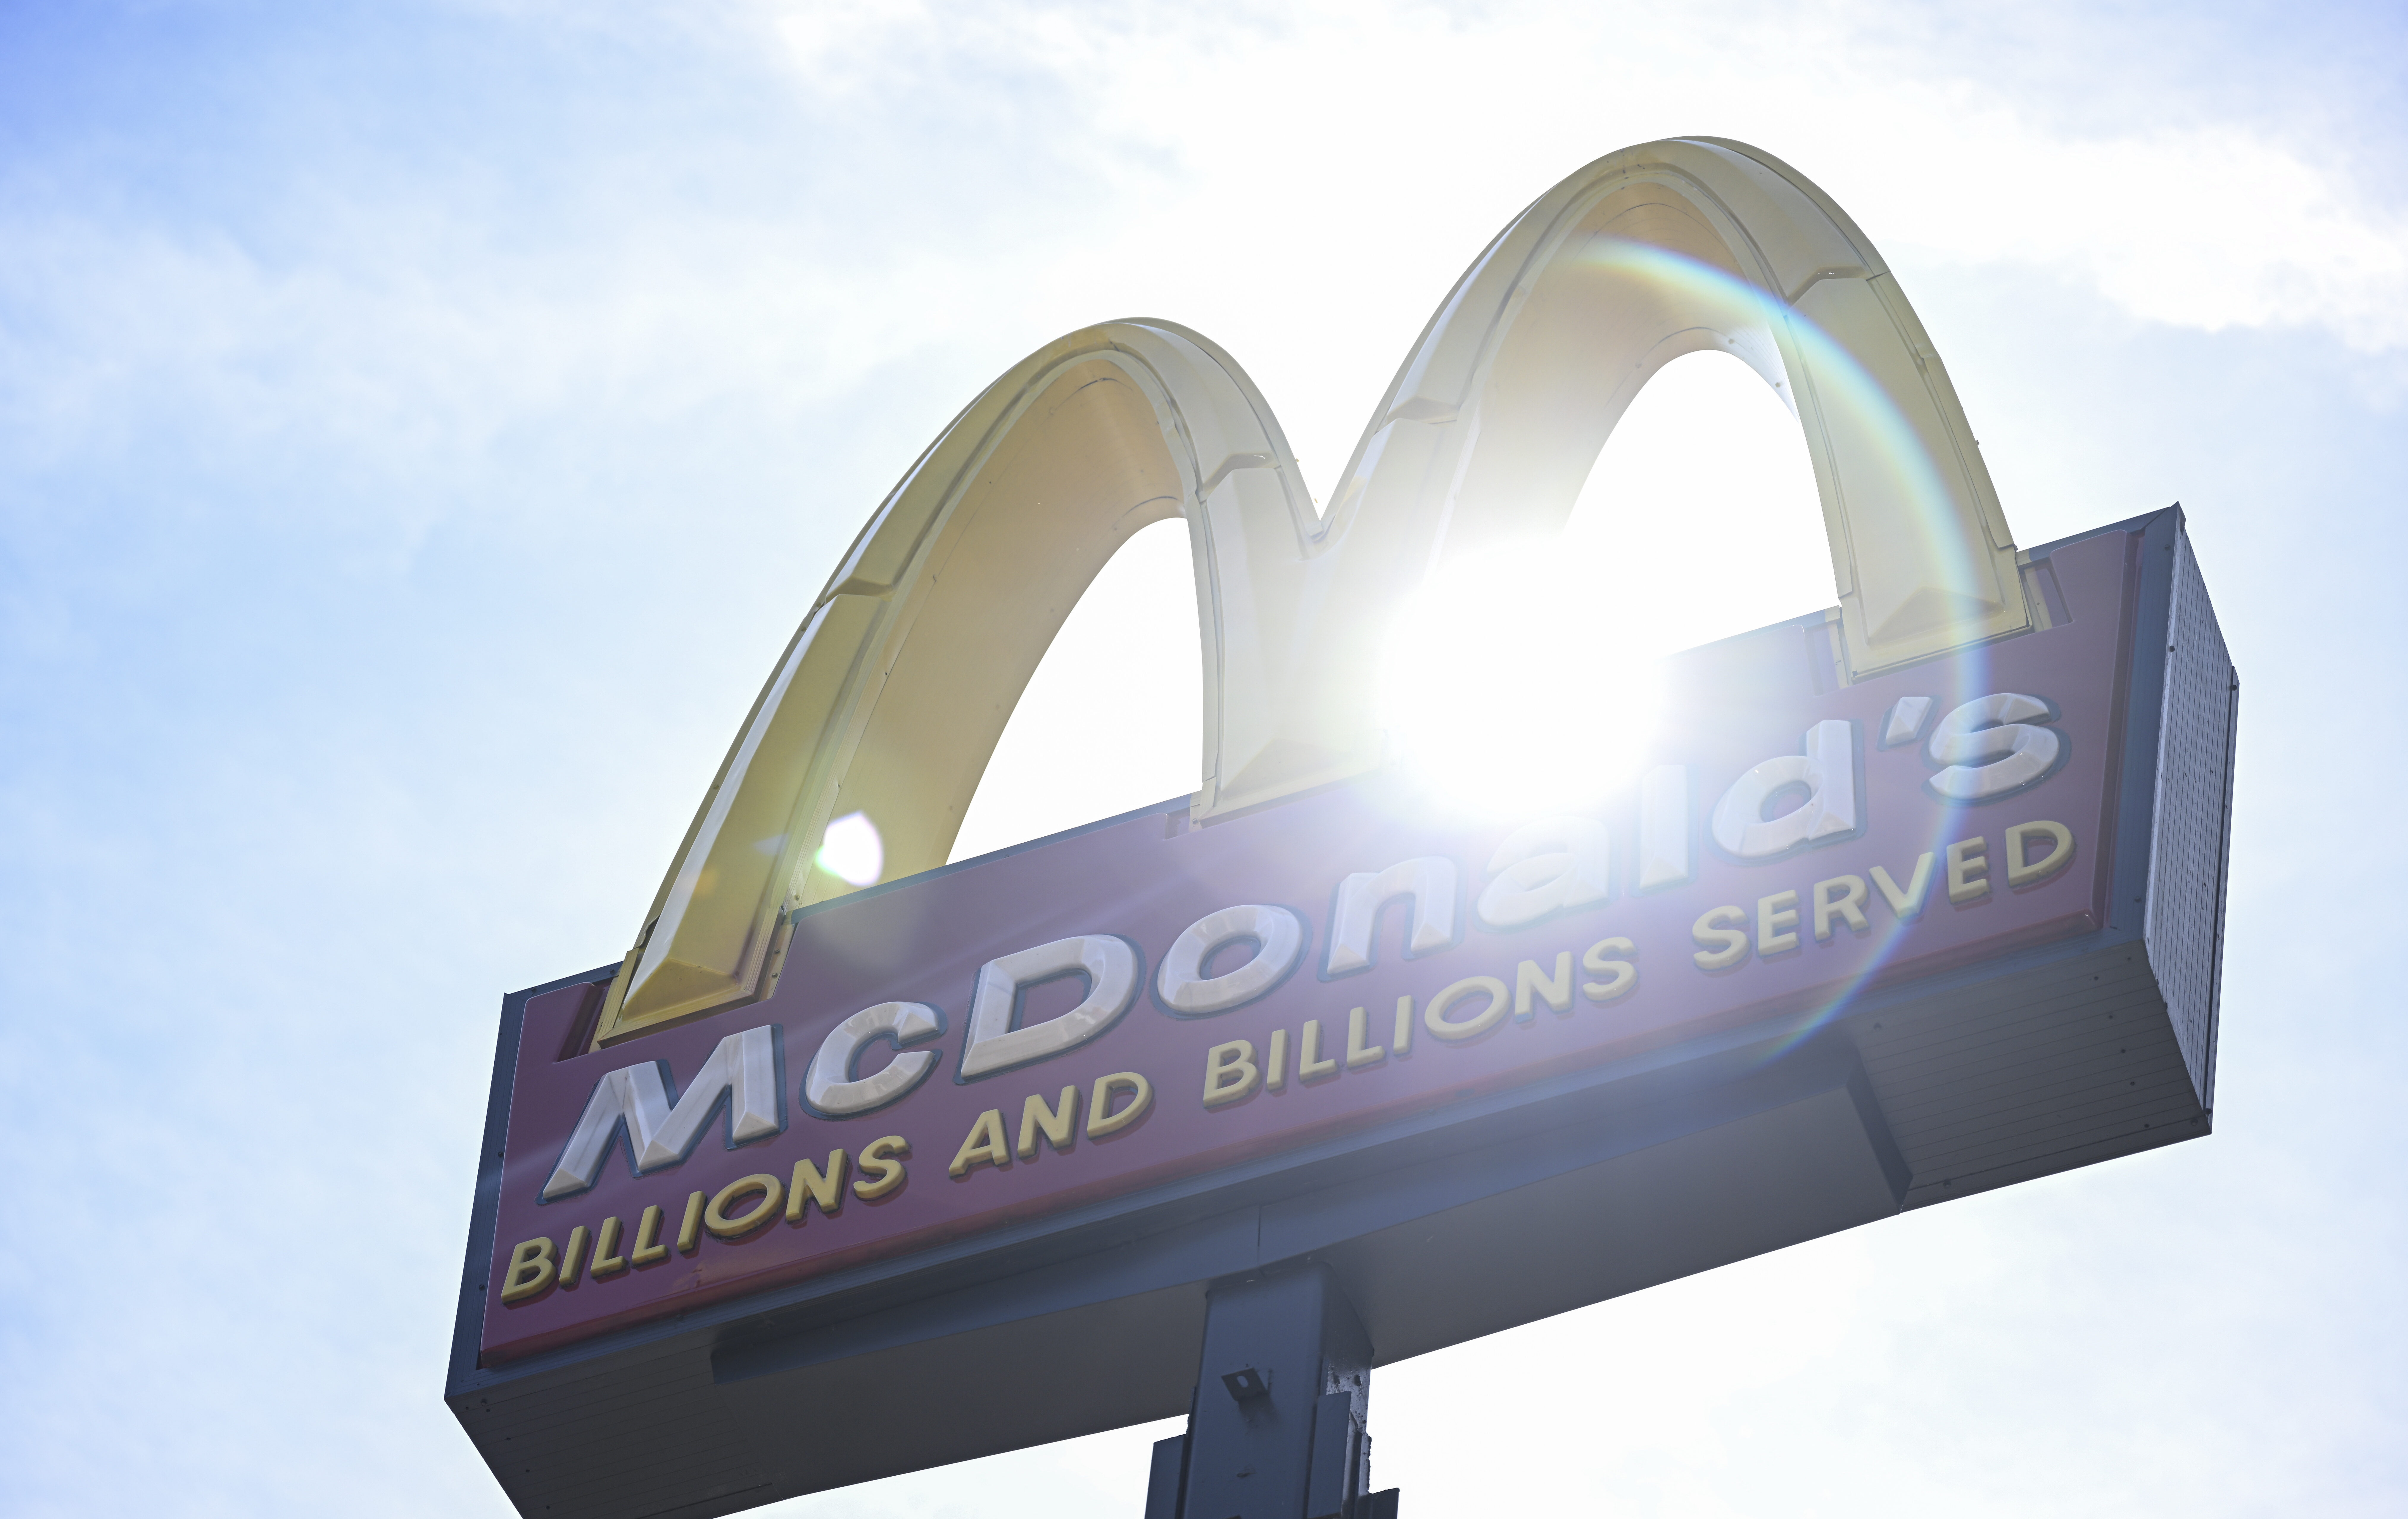 McDonald's temporarily closed stores ahead of layoffs in United States